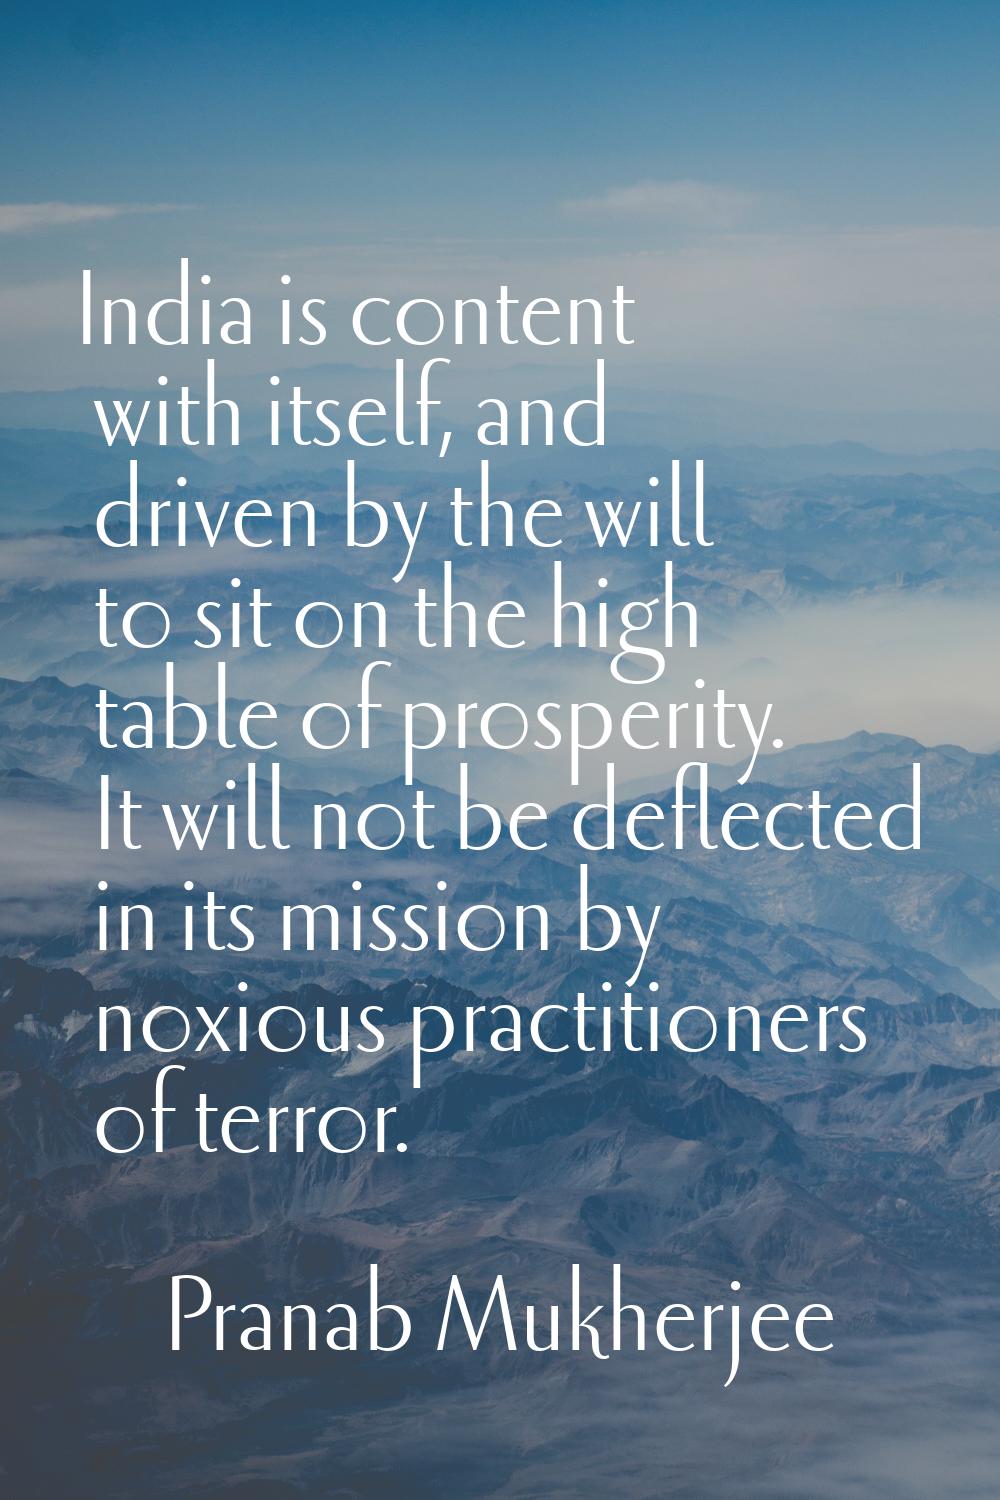 India is content with itself, and driven by the will to sit on the high table of prosperity. It wil